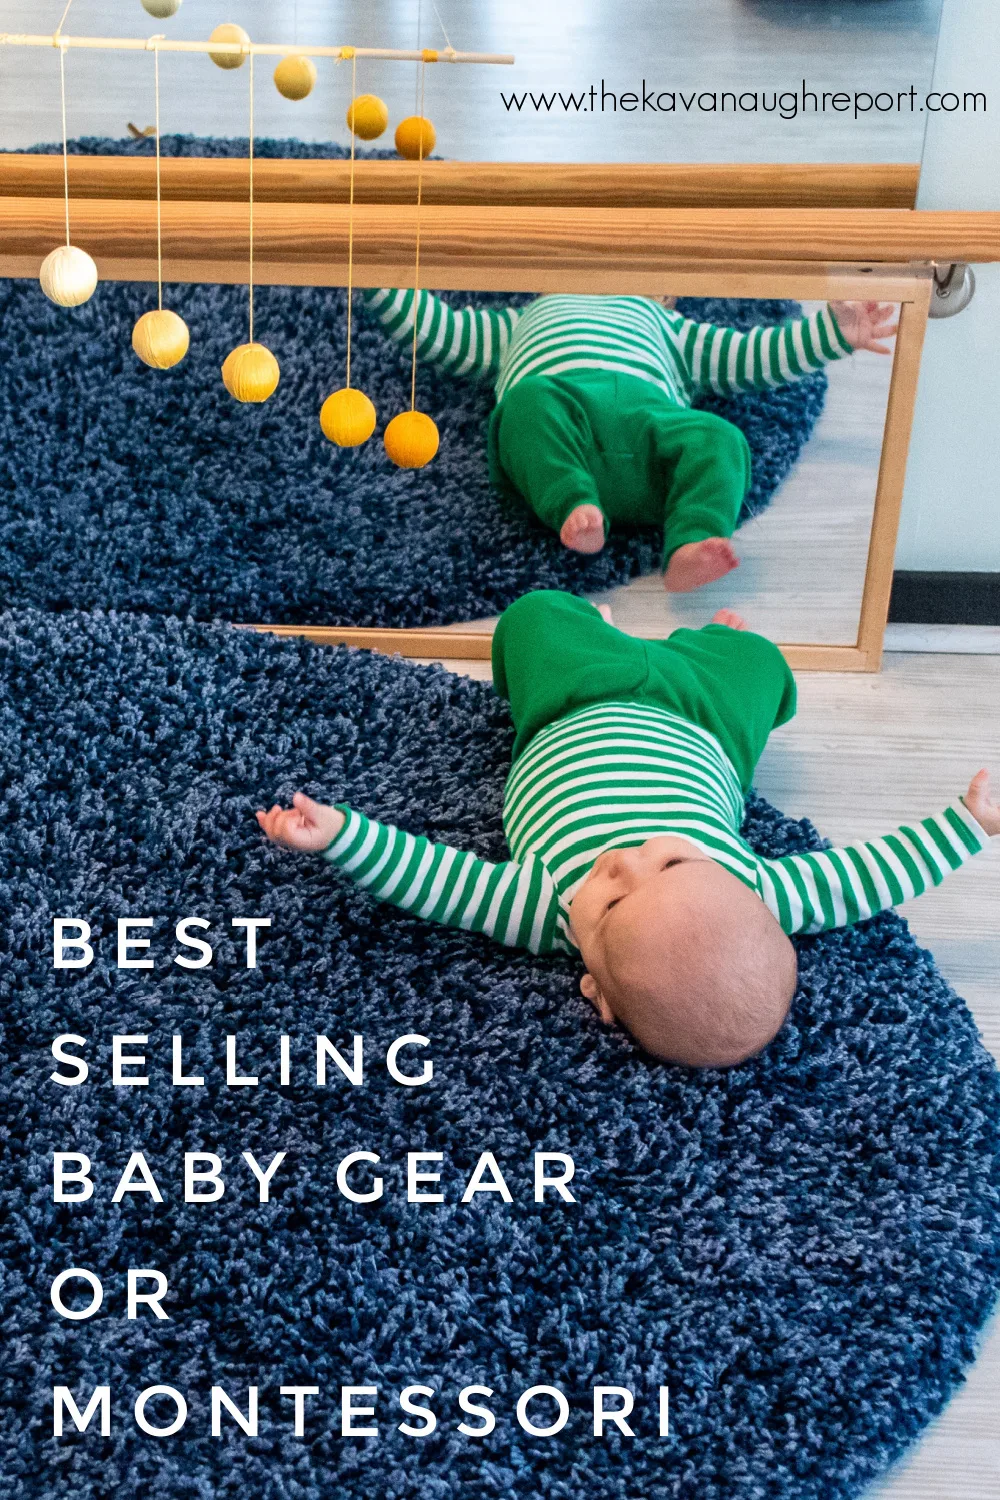 Montessori baby spaces and activities that can replace popular "best selling" baby toys and gear. Simple, natural experiences for babies are better.